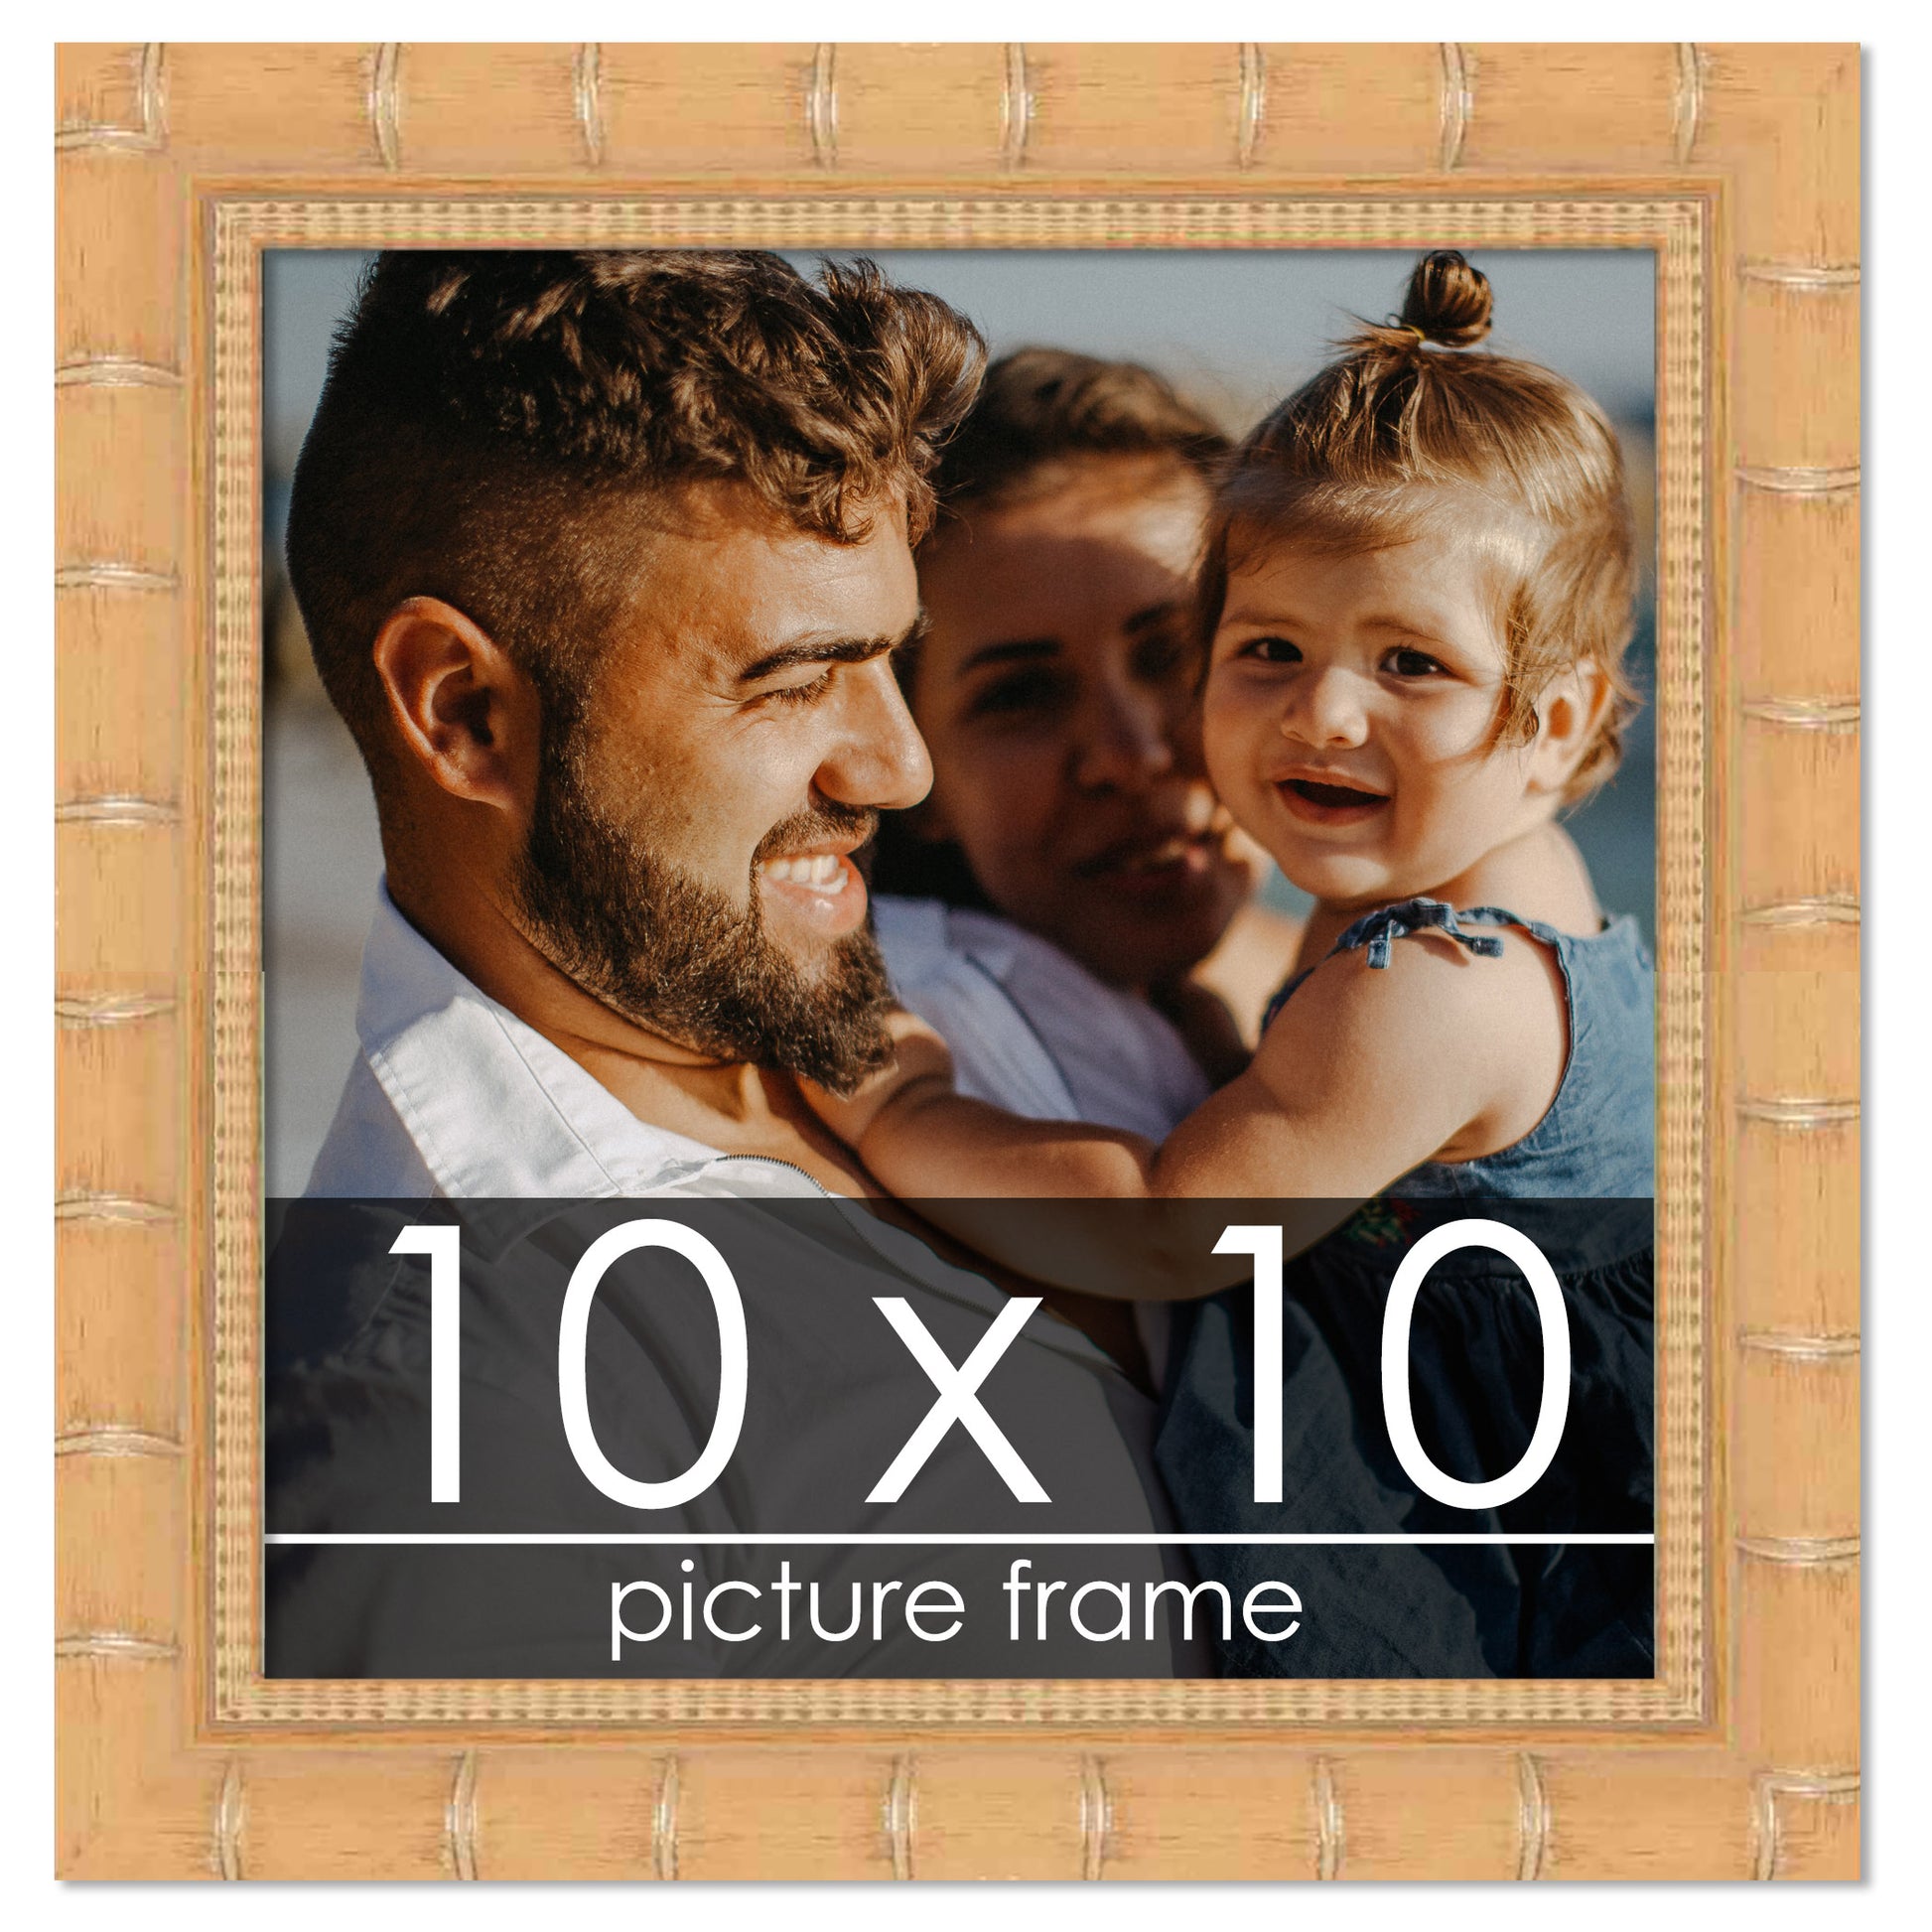 16x24 Bamboo Silver Complete Wood Picture Frame with UV Acrylic, Foam Board Backing, & Hardware